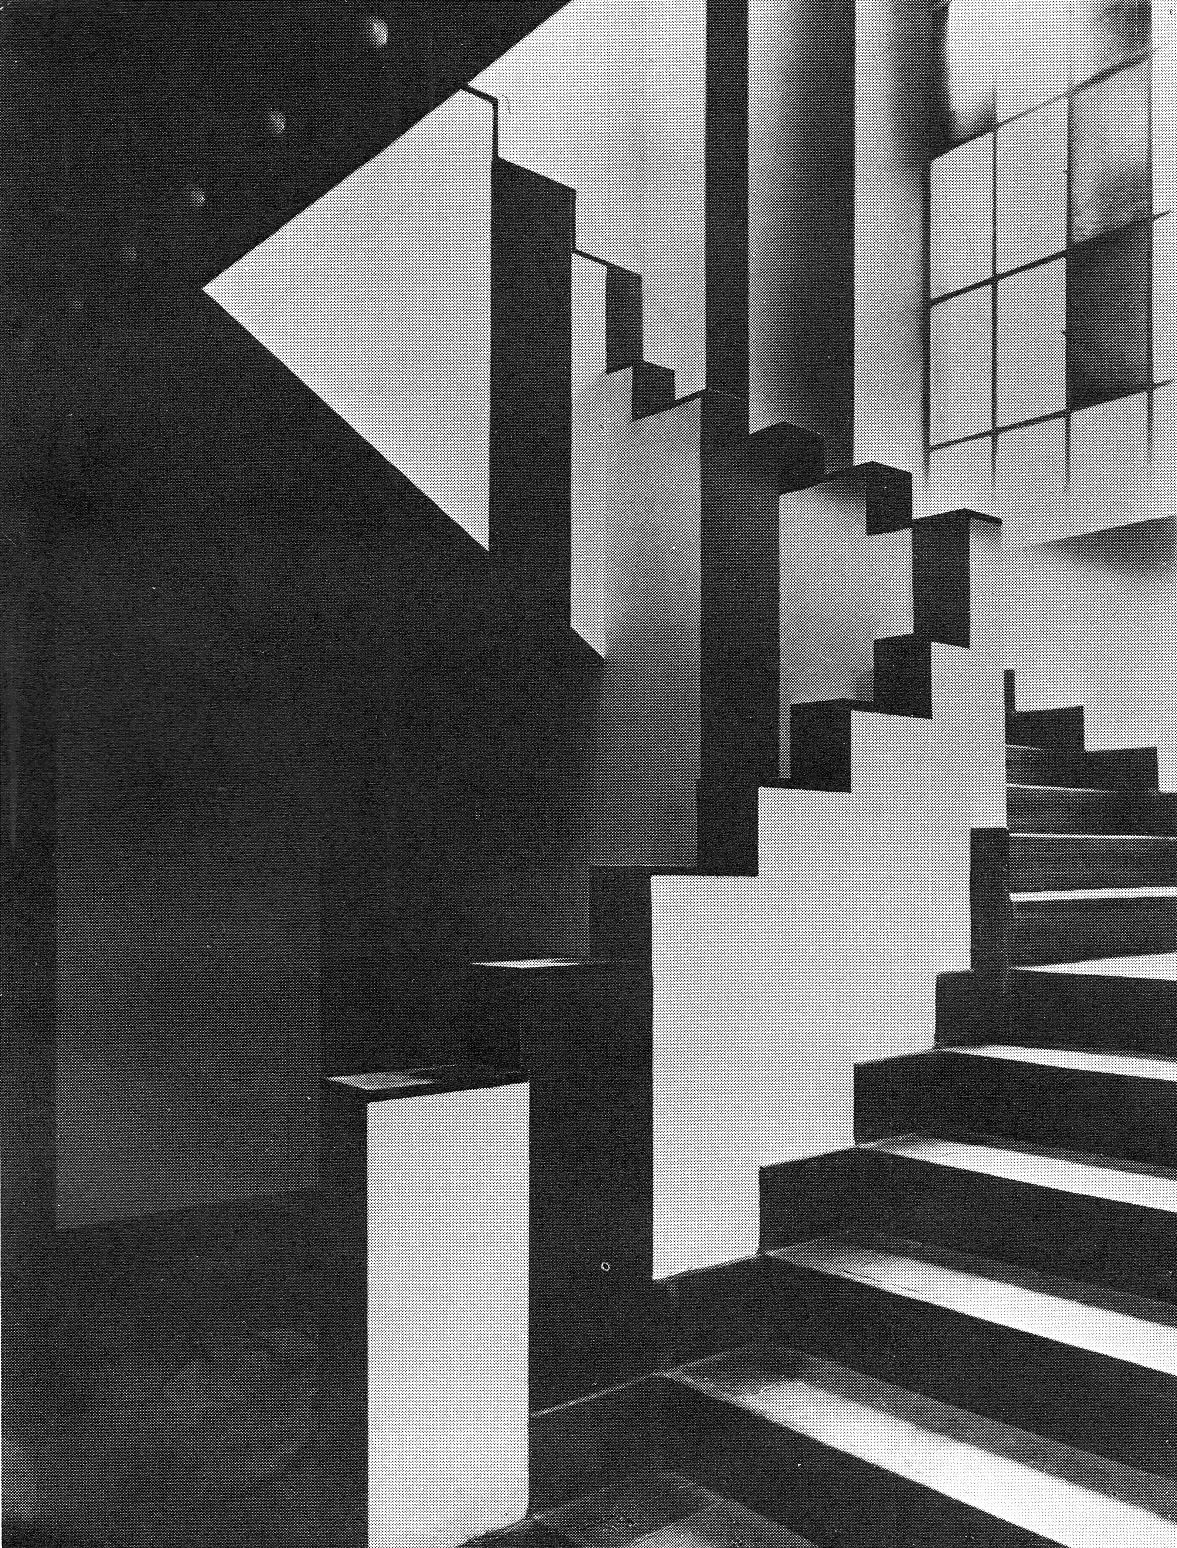 JEAN ARP AND SOPHIE TAEUBER-ARP      STAIRWAY IN THE CAFE AUBETTE IN STRASBOURG, 1928